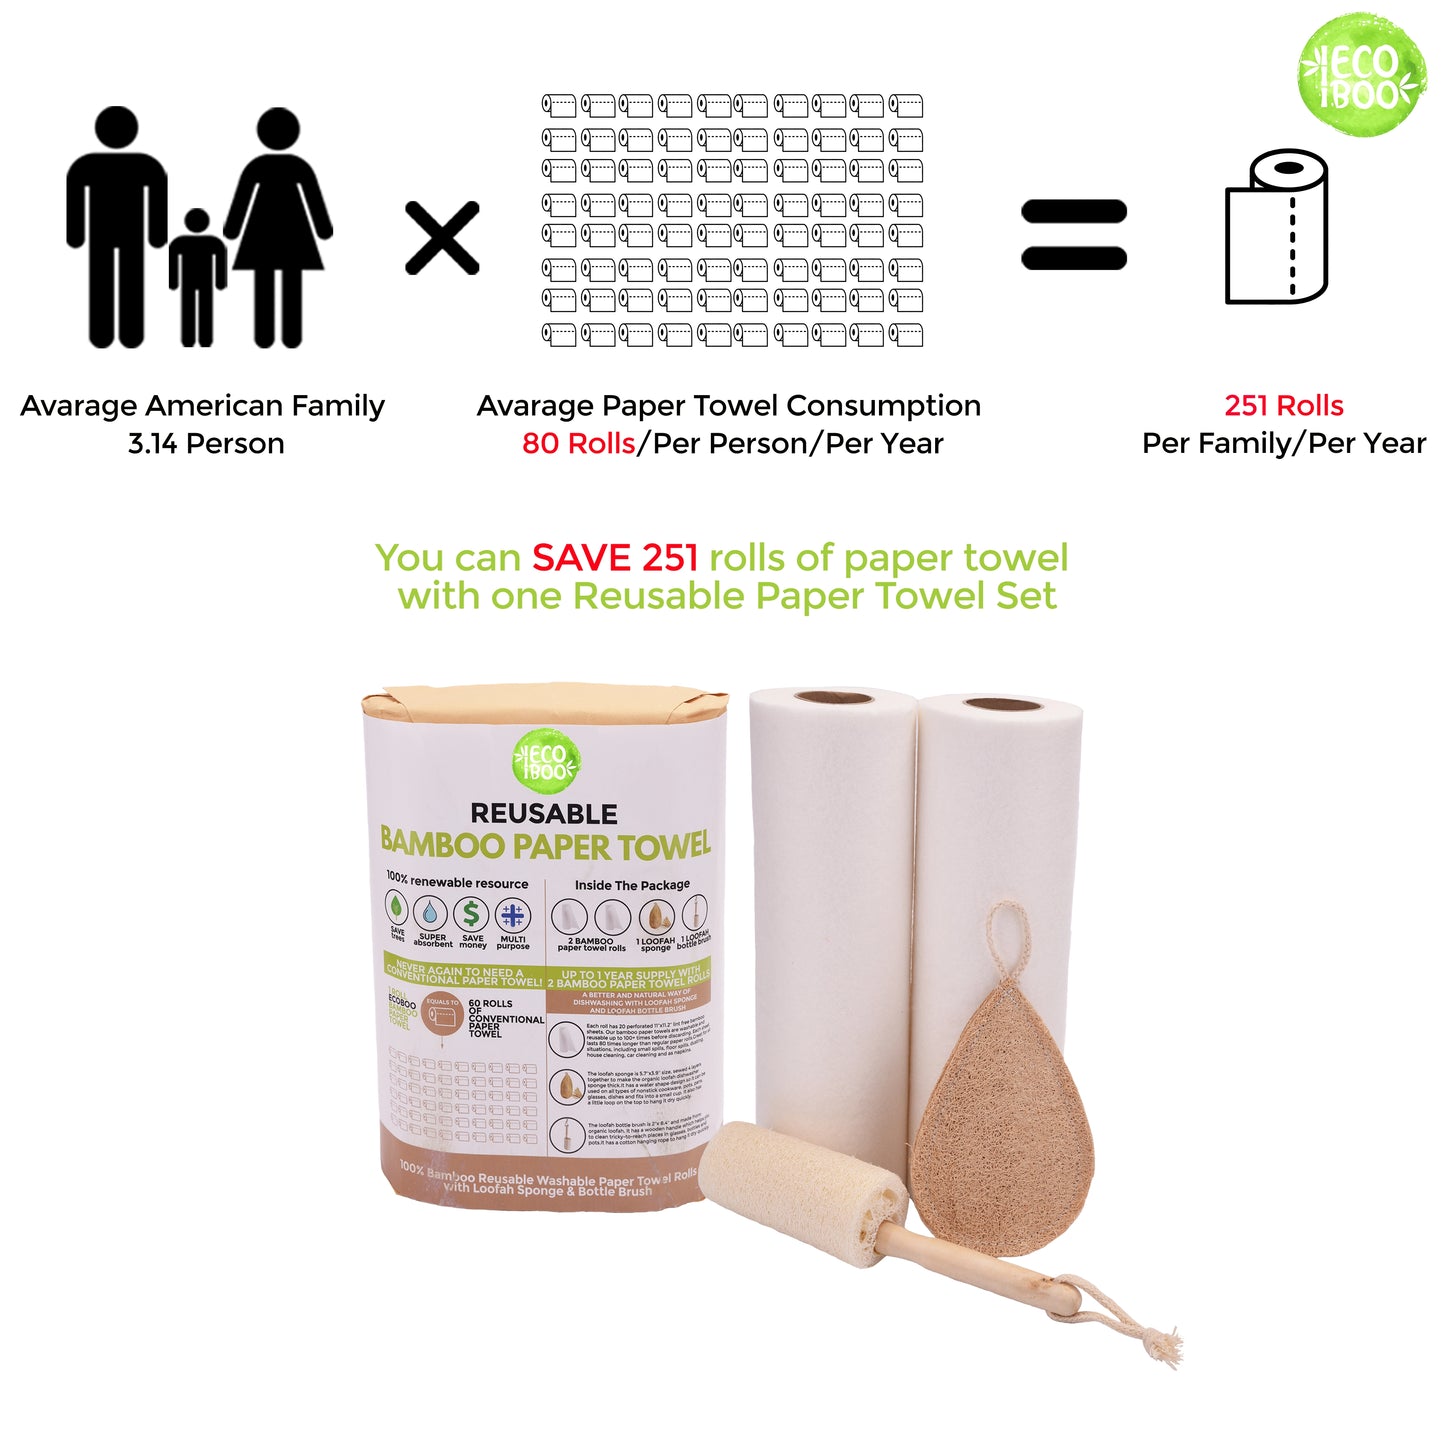 Save 251 rolls of paper towels with bamboo reusable paper towels. 